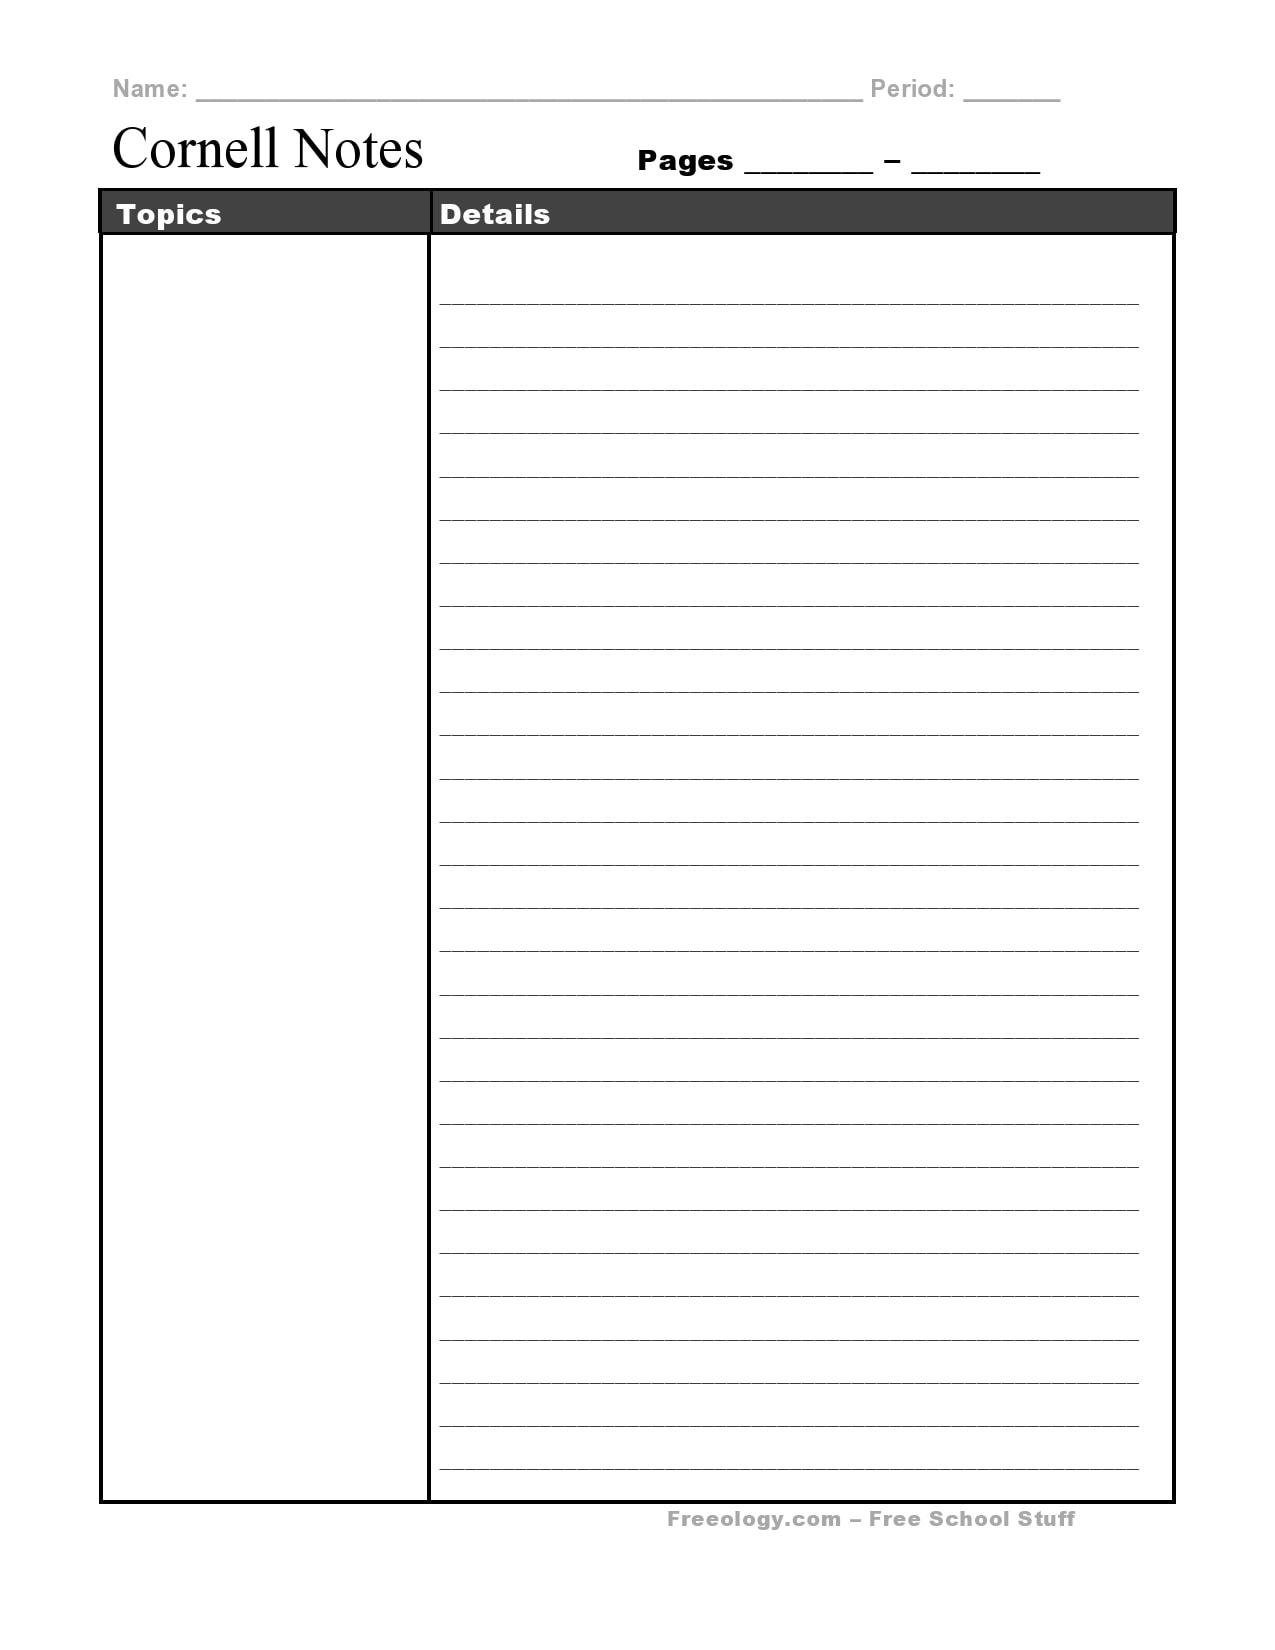 23 Printable Cornell Notes Templates [Free] - TemplateArchive In Two Column Notes Template